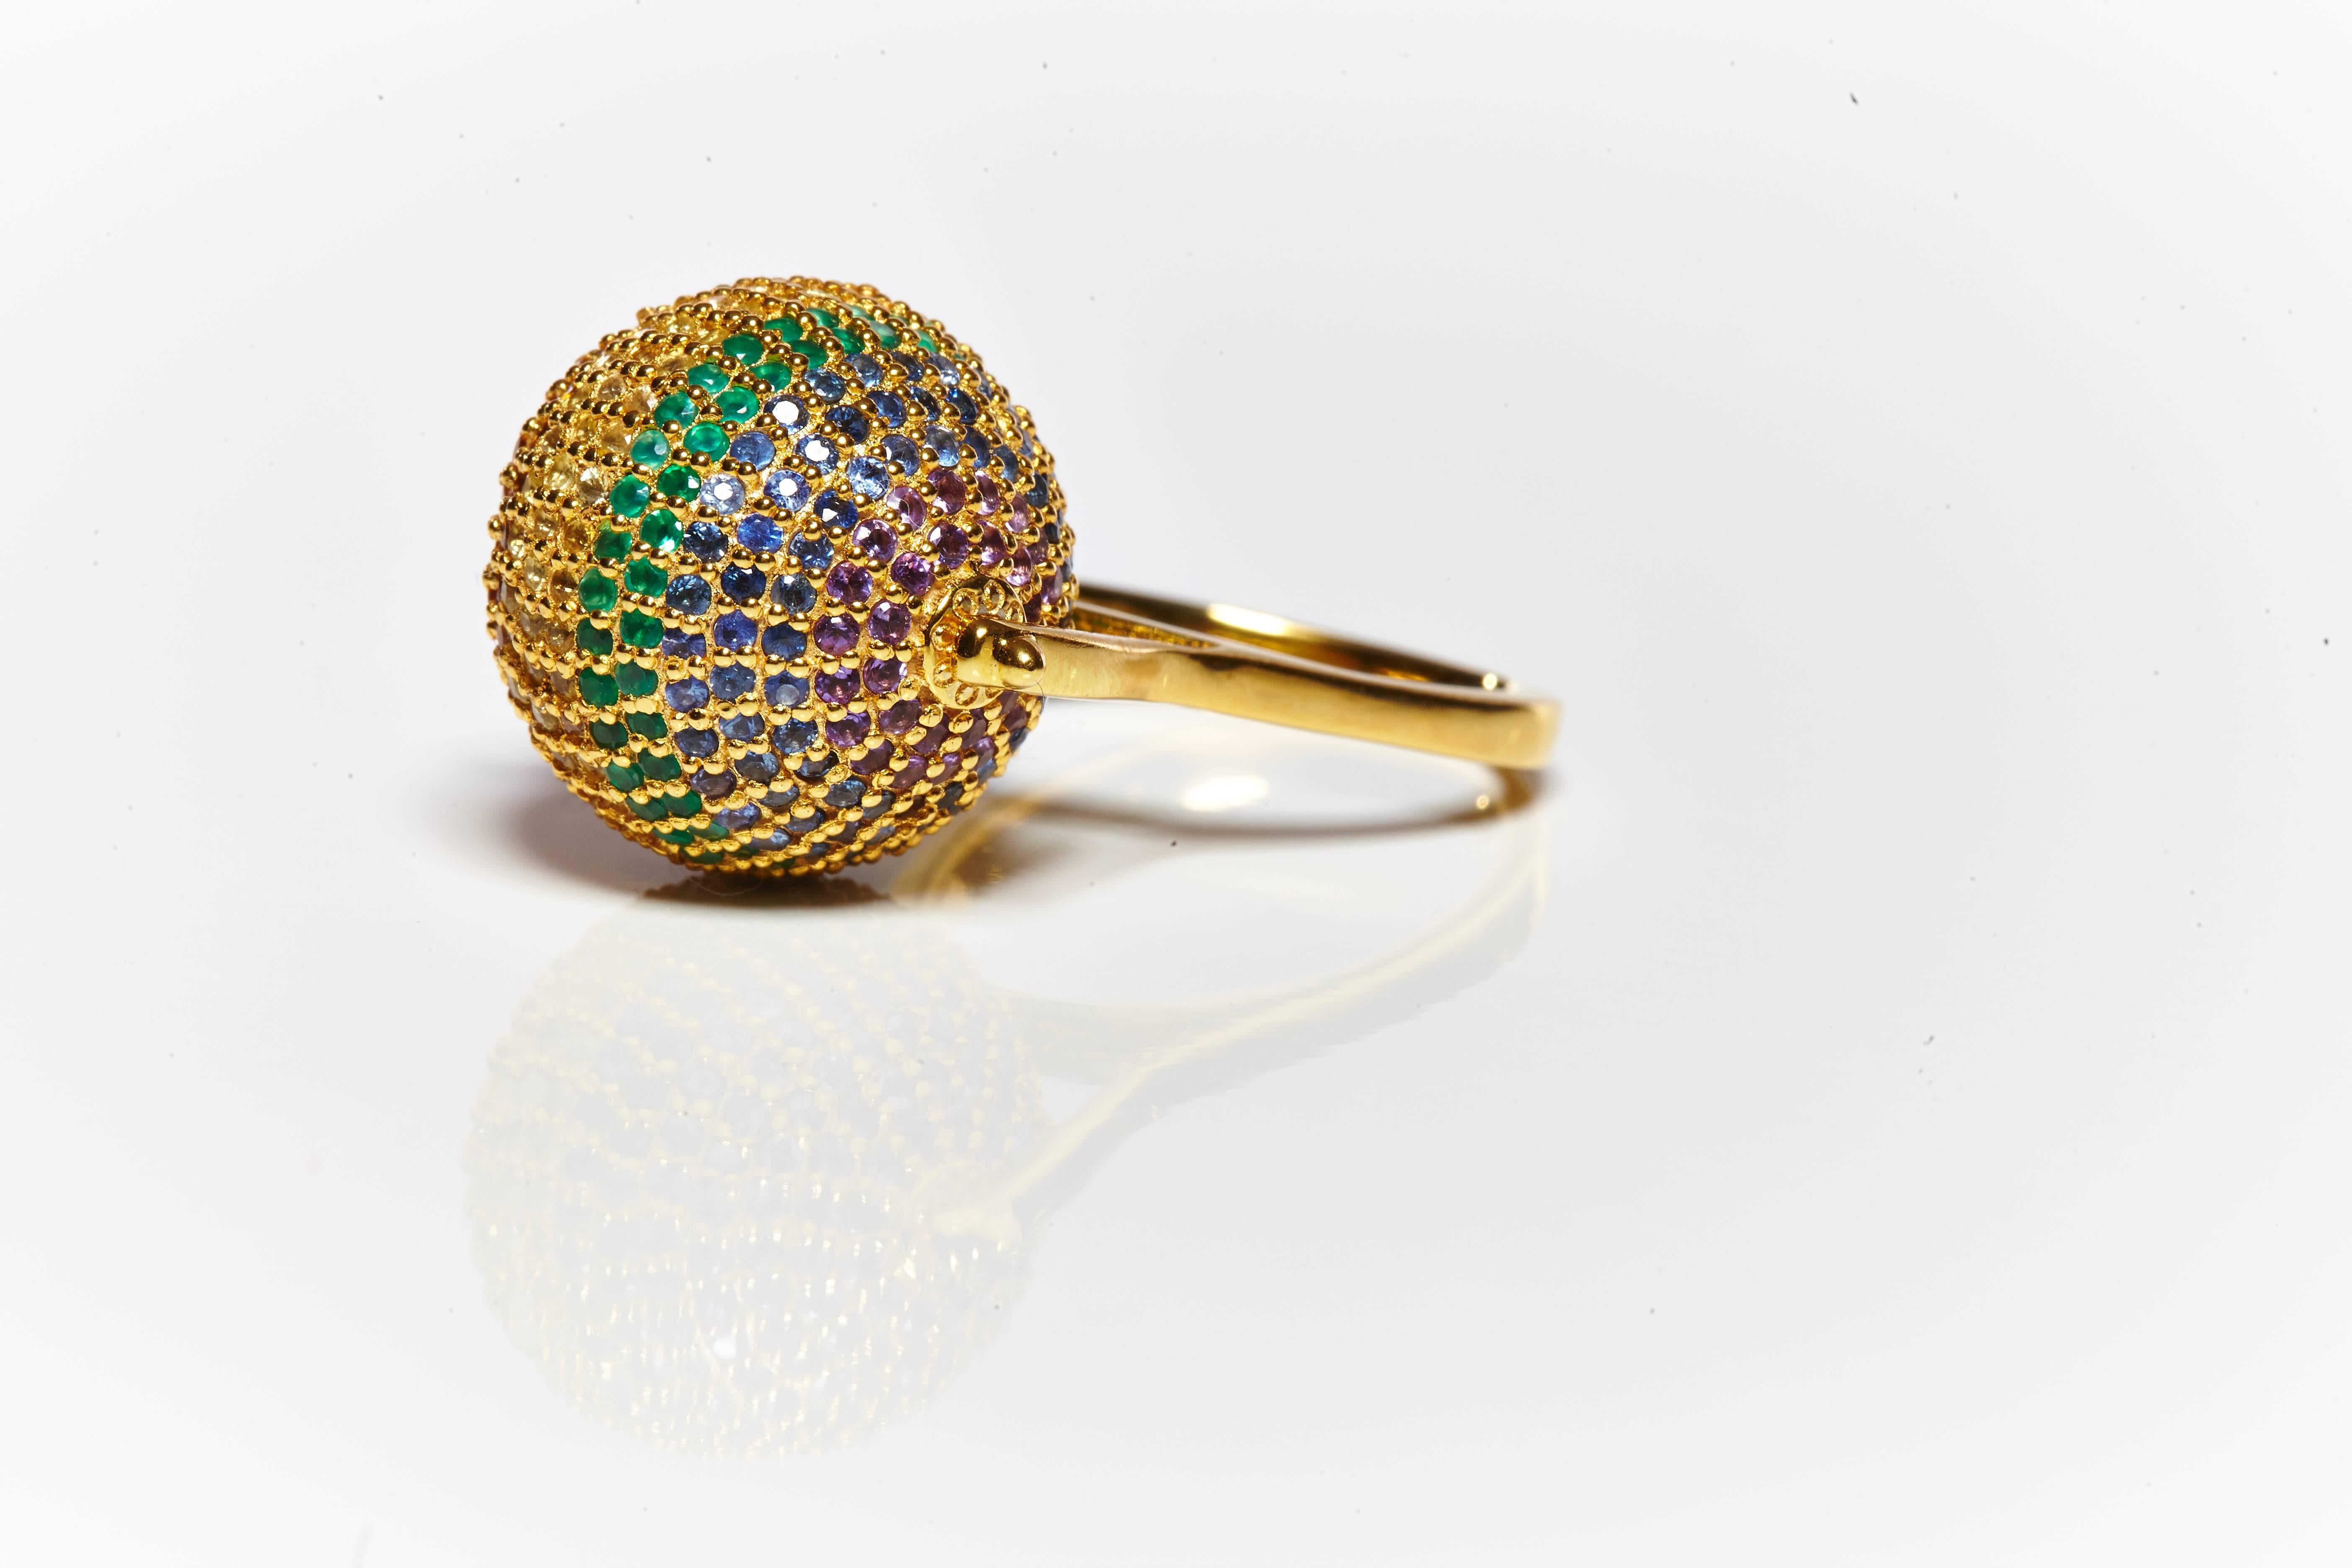 Gold Vermeil with Multi Stone Pave. 14mm Ball. 
Handmade in Jaipur, India.

Stone: Ruby, citrine, yellow sapphire, green onyx, blue sapphire, amethyst.
Metal: Gold vermeil
Place of Origin: India
Length: 3.8cm
Width: 2cm
Diameter:1.8cm
